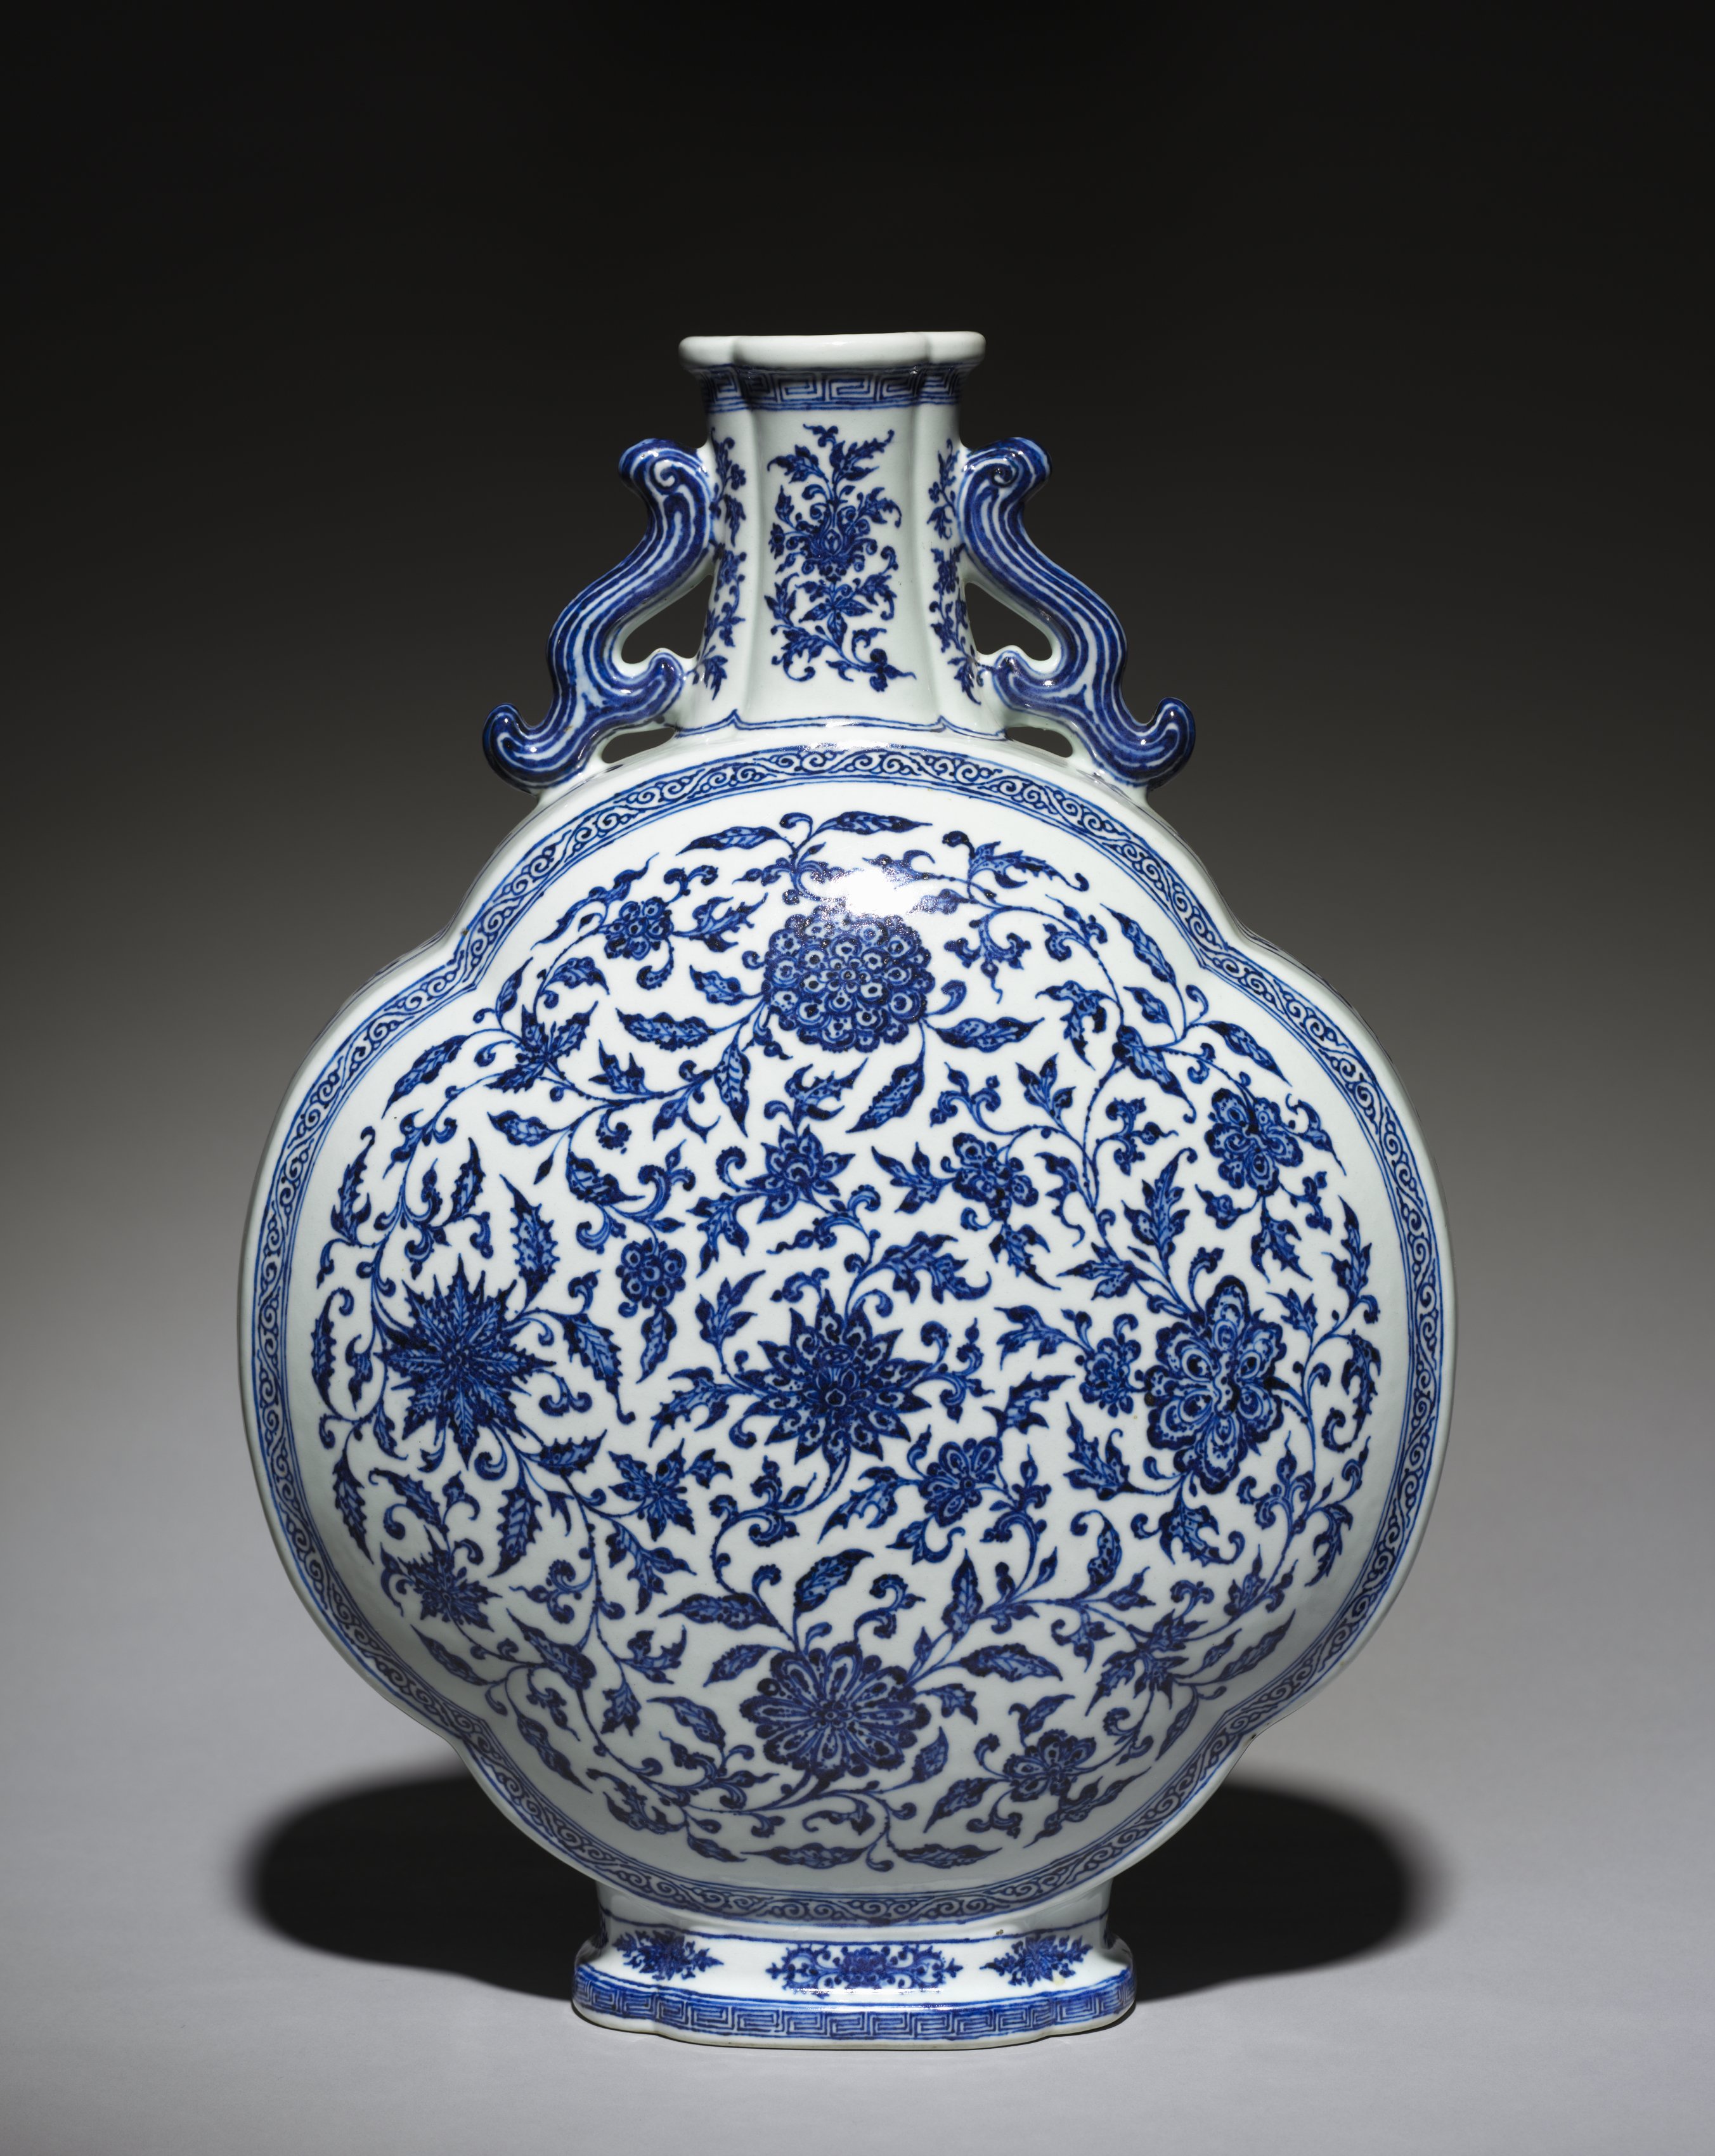 Gourd Flask with Floral Scrolls